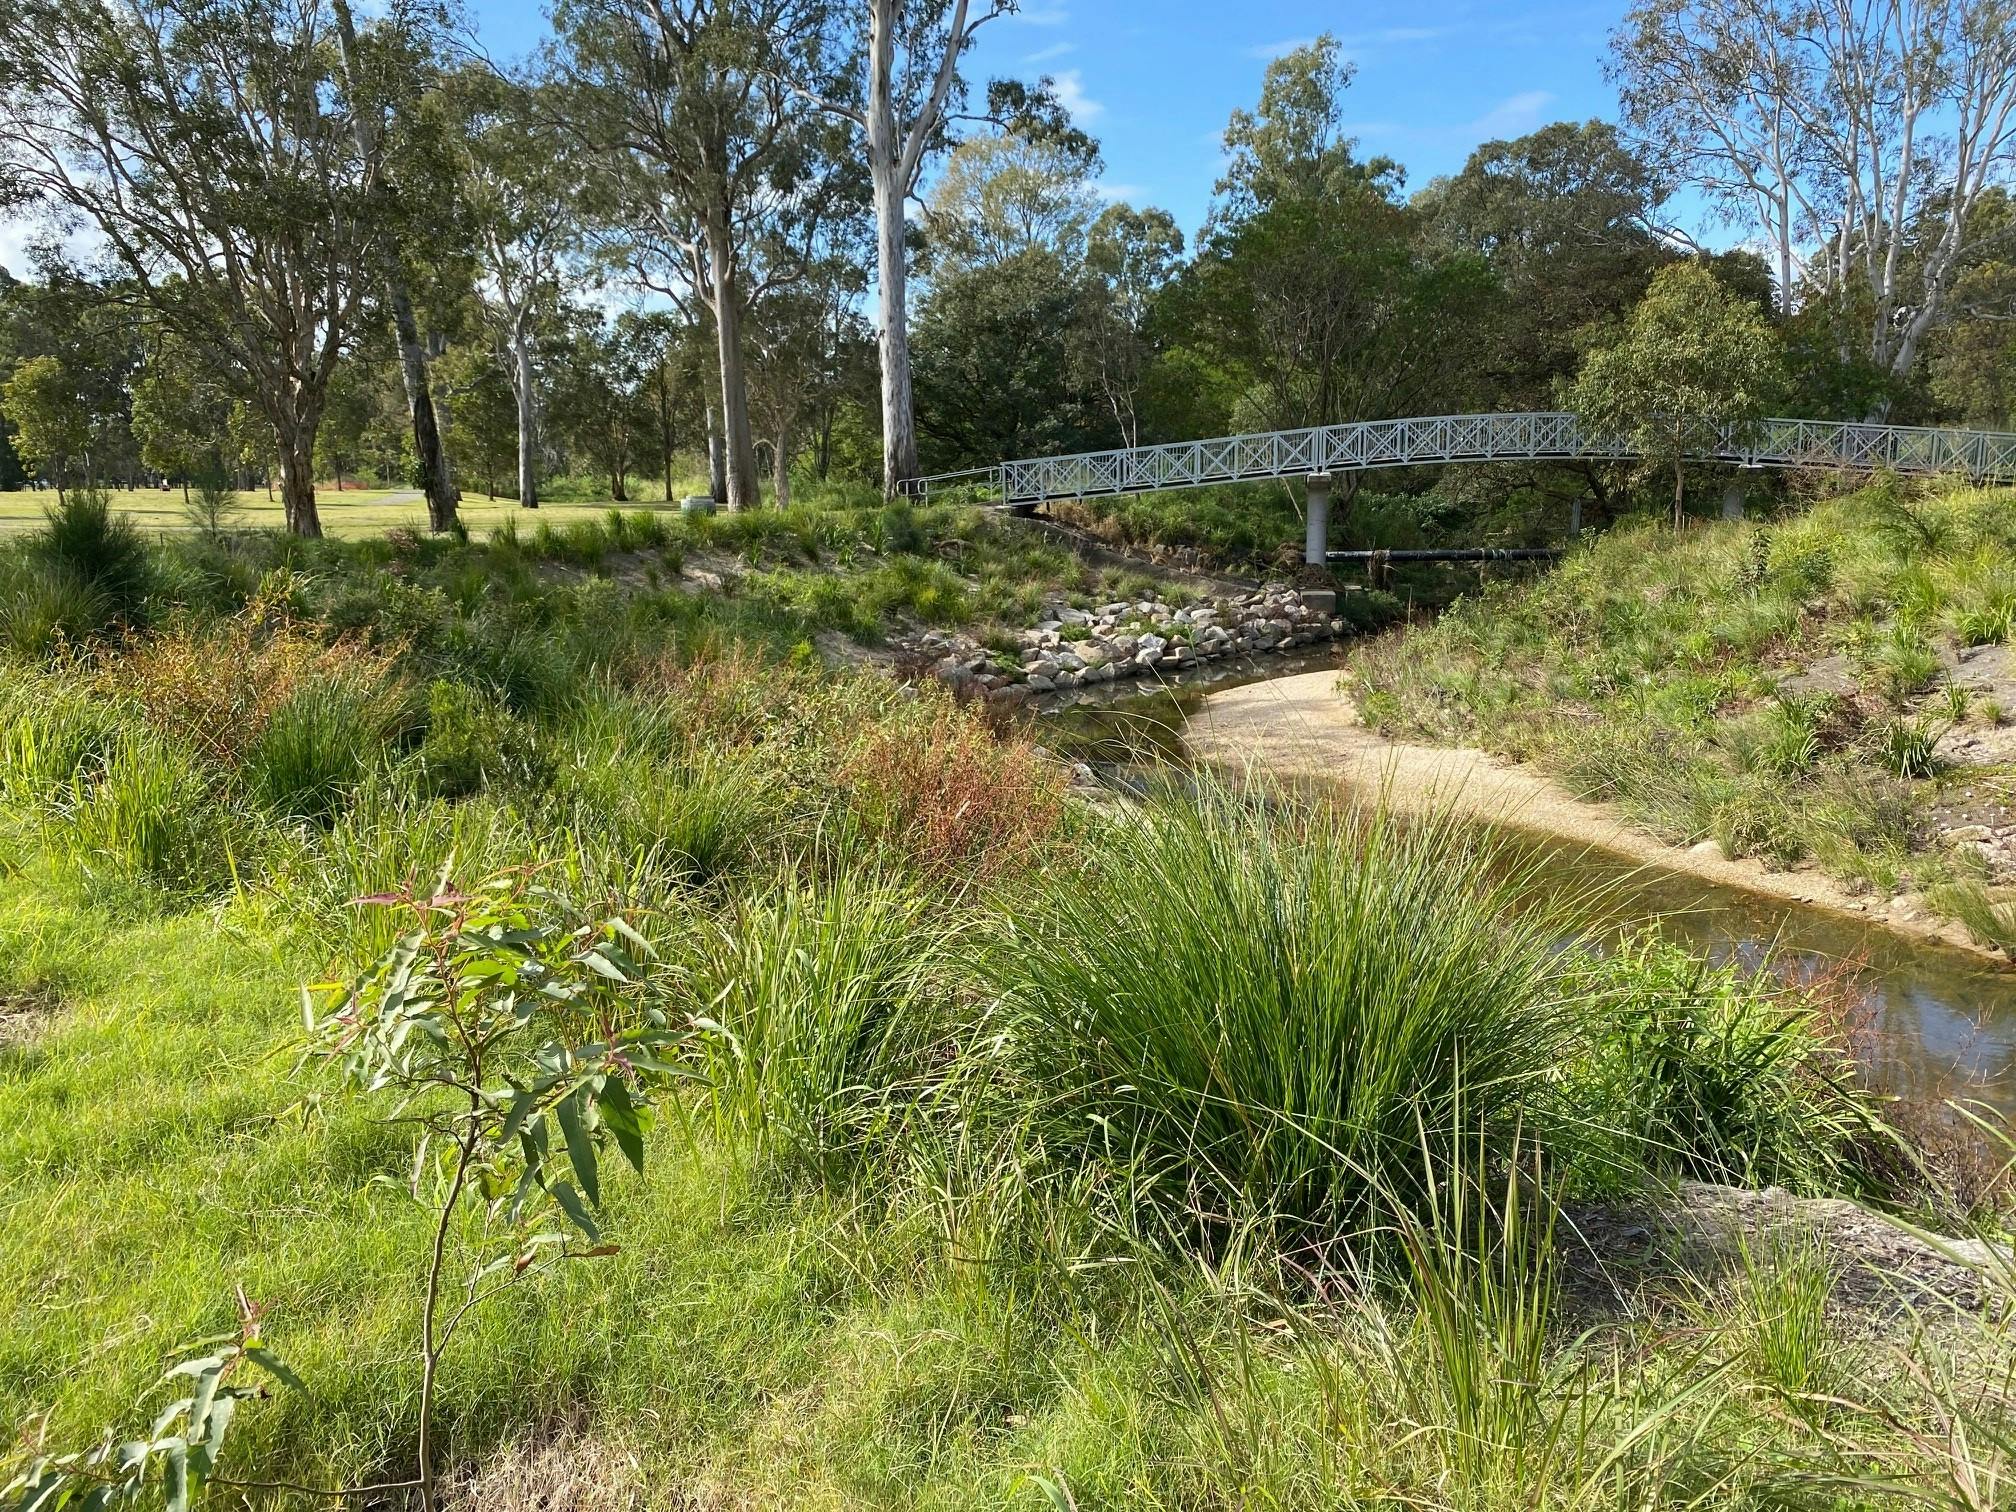 Downfall Creek - vegetation establishment in areas of the project completed during 2021